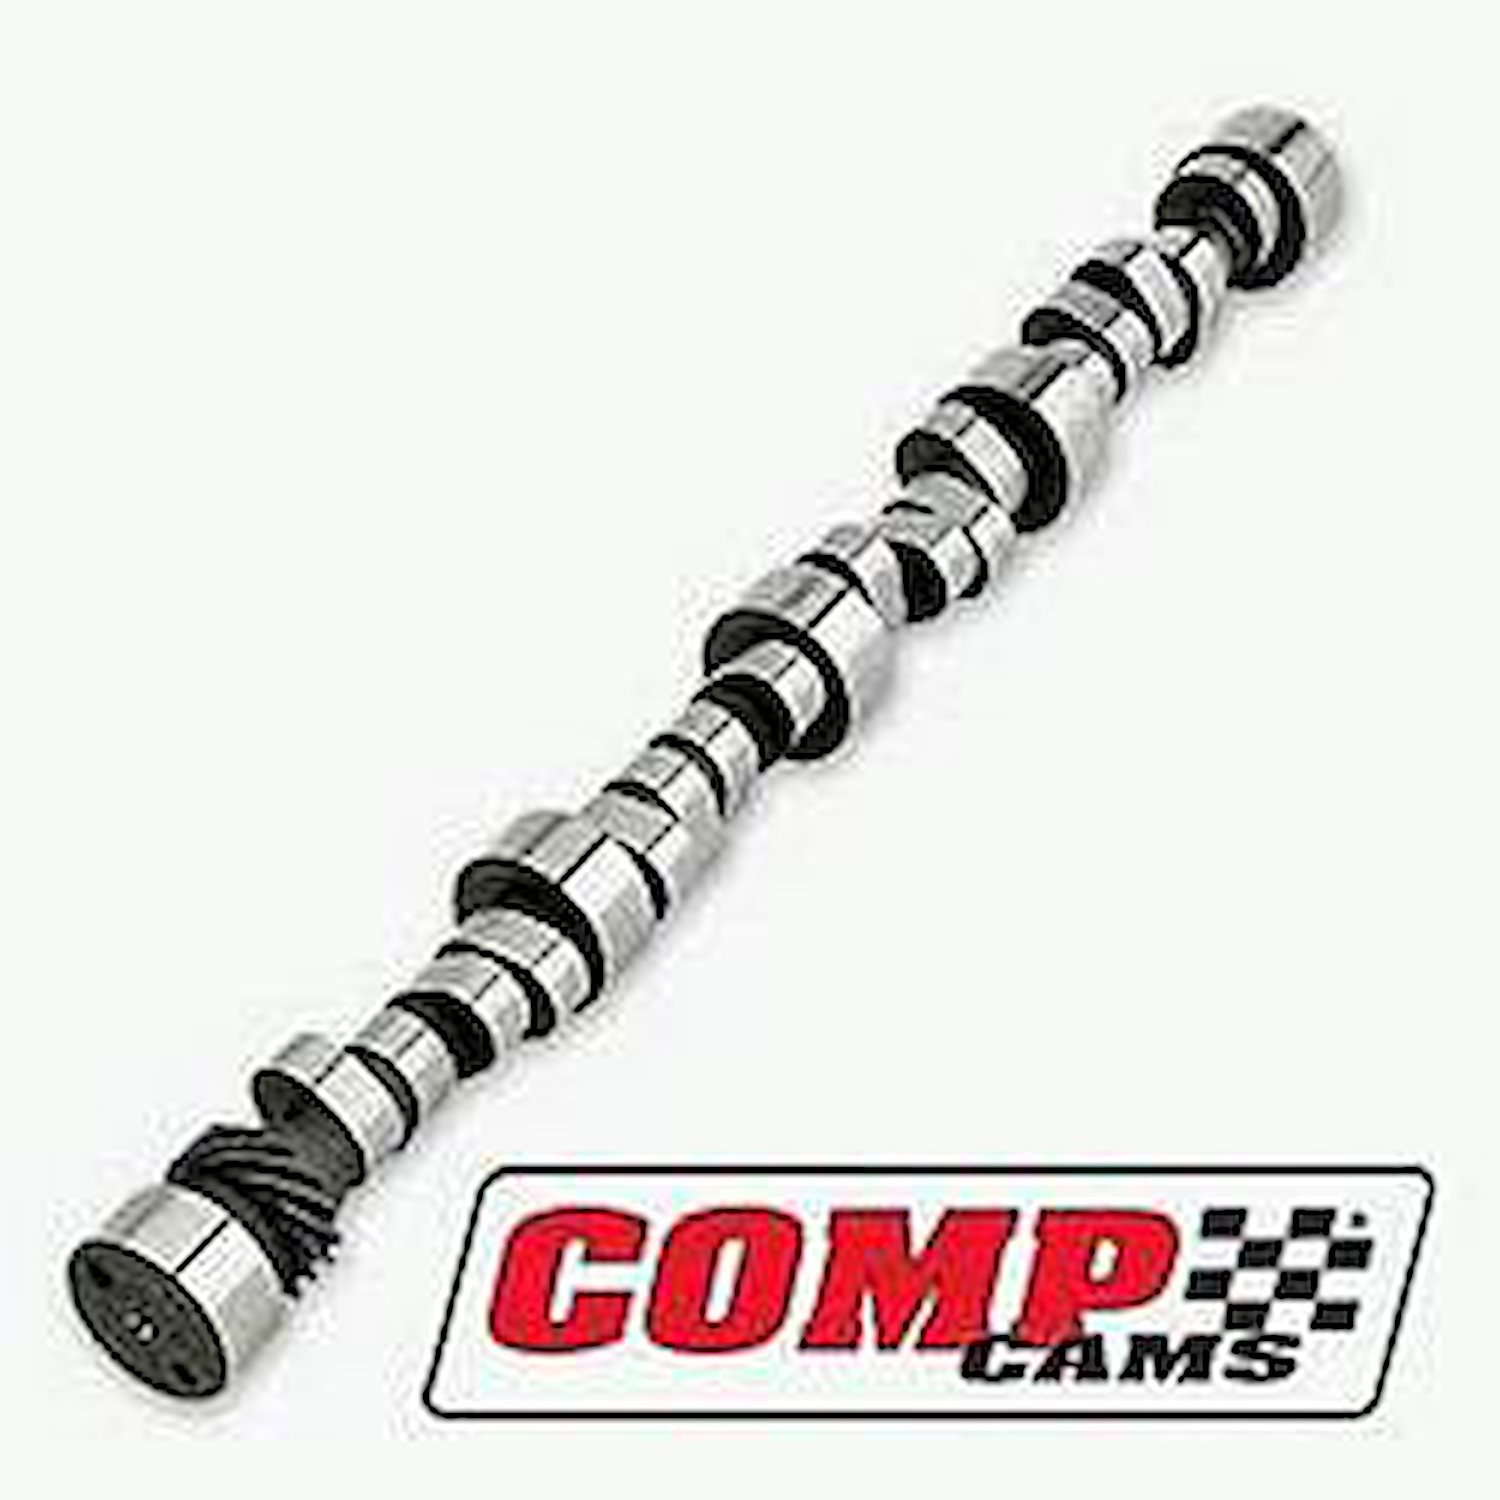 XFI Hydraulic Roller Camshaft Small Block Chevy 305/350 1987-95 Lift: .570"/.565" With 1.6 Rockers